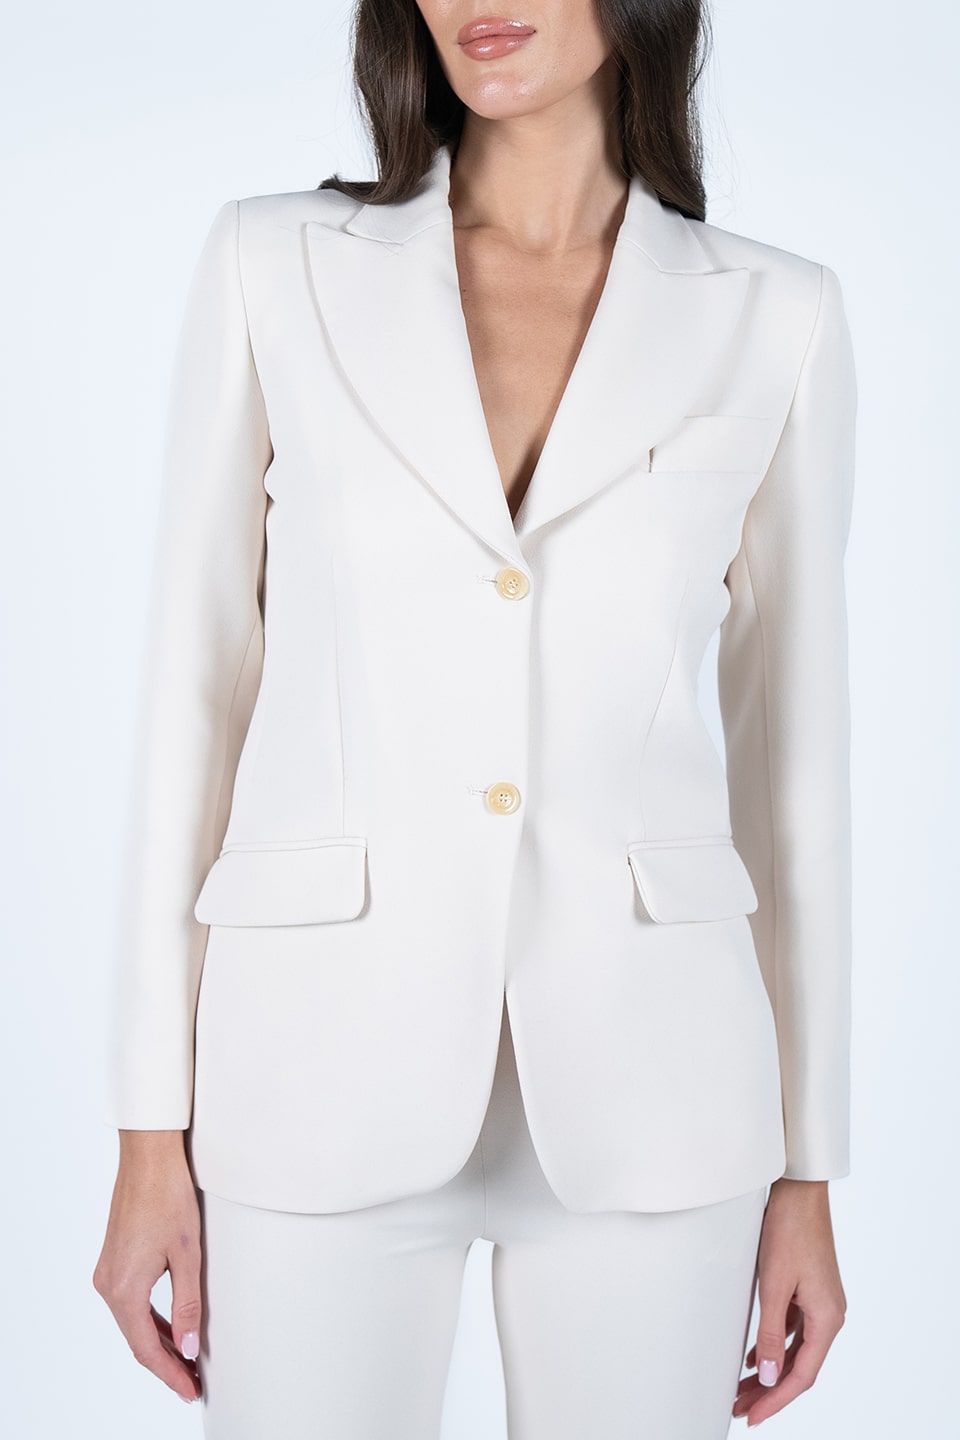 Thumbnail for Product gallery 1, Cady Butter Blazer